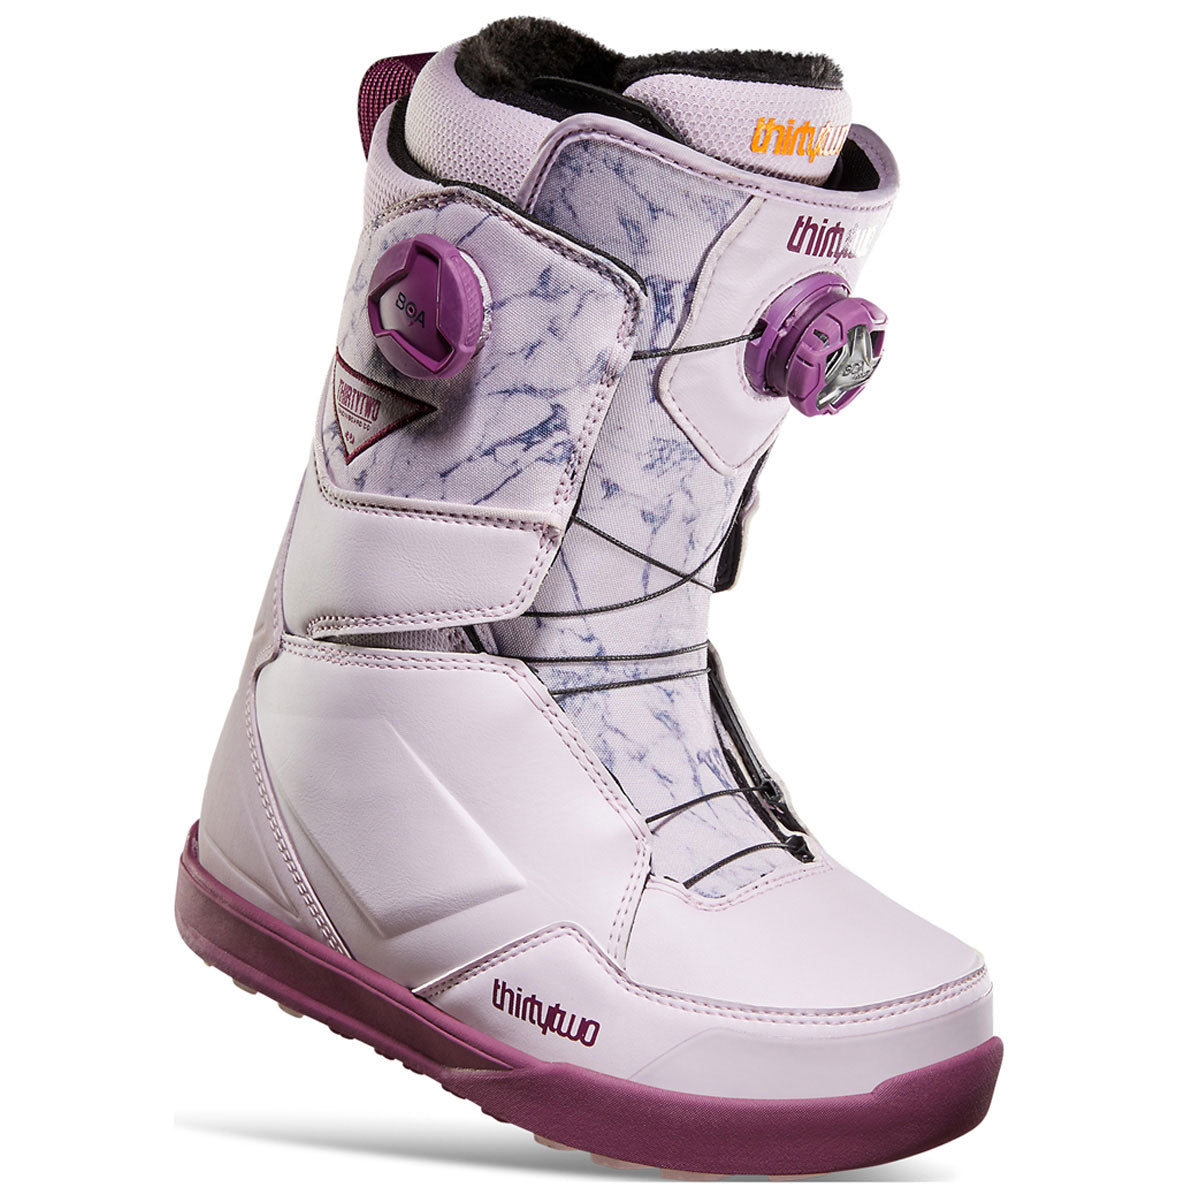 Thirty Two Womens Lashed Double Boa Snowboard Boots - Lavender image 1